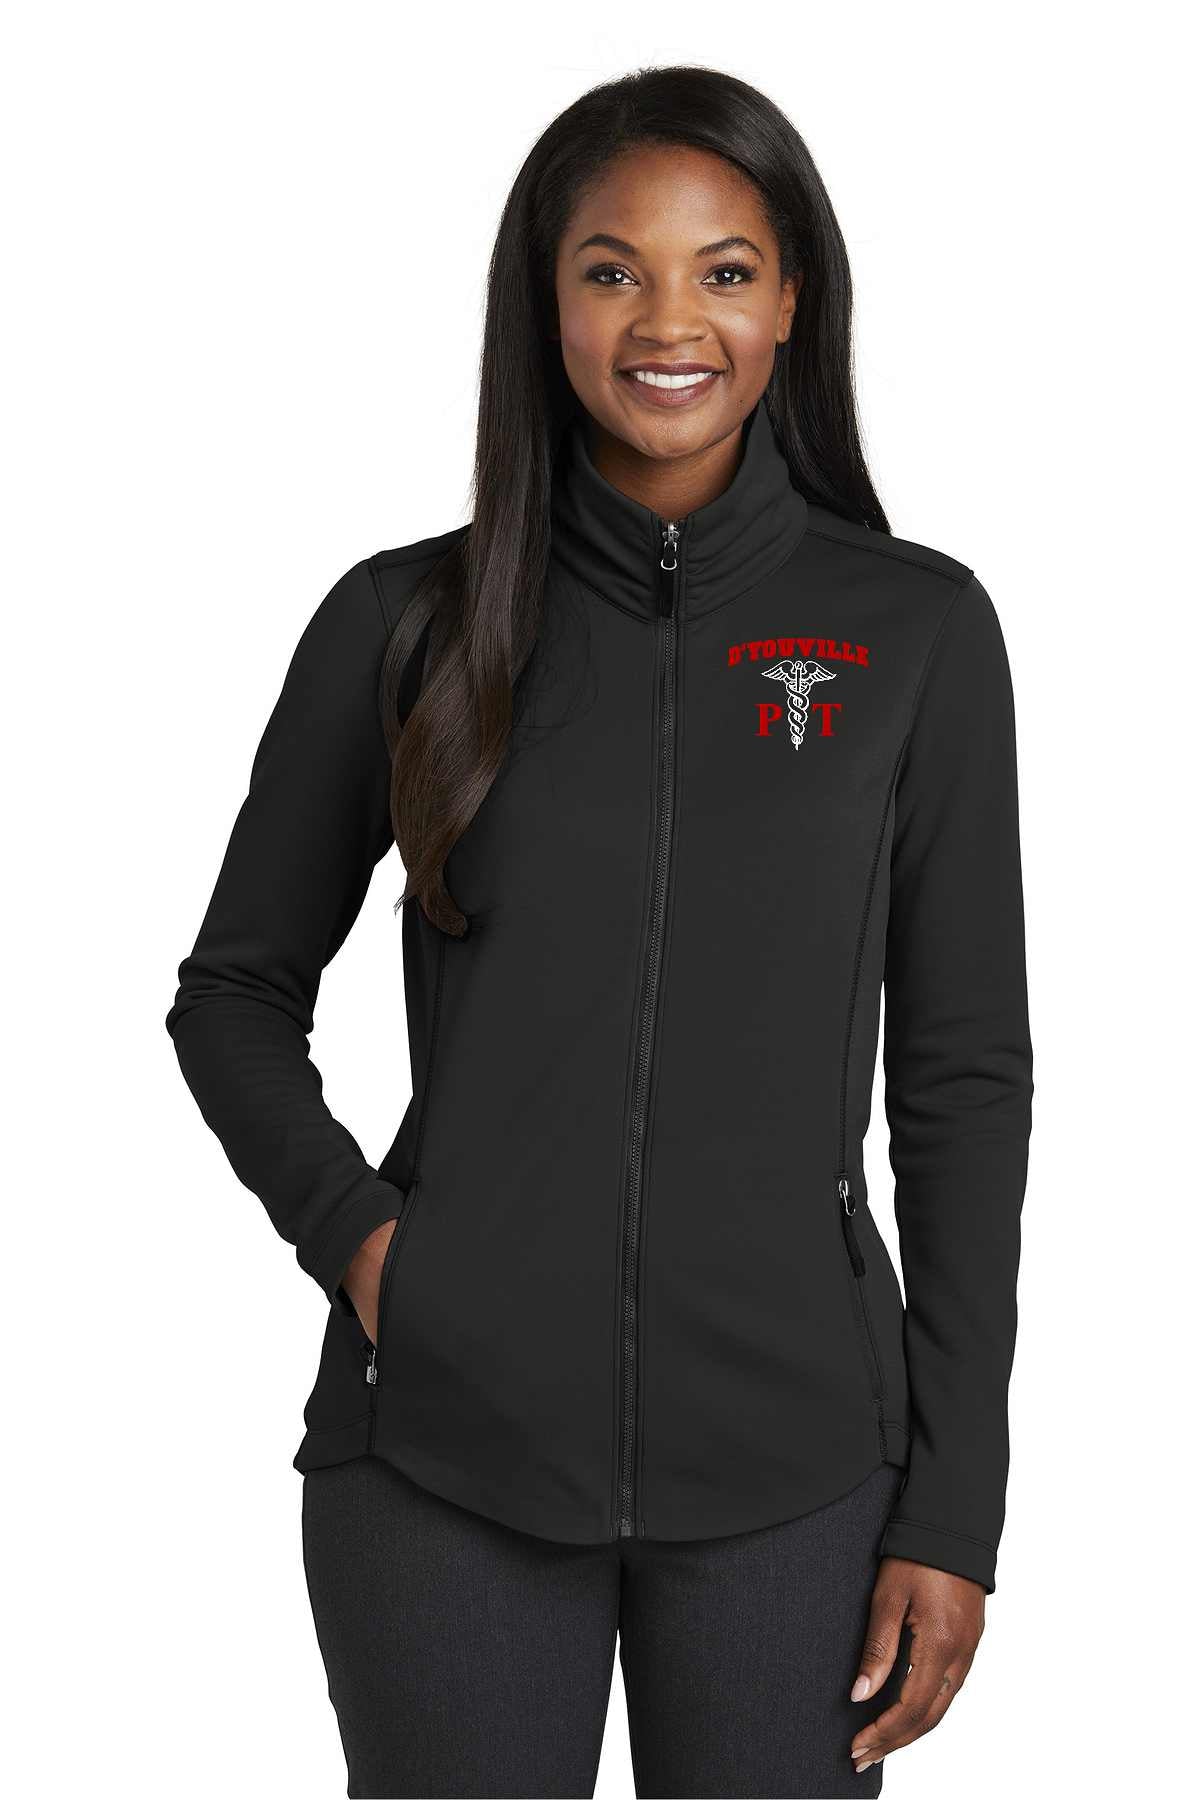 D'Youville Physical Therapy L904 Port Authority ® Ladies Collective Smooth Fleece Jacket